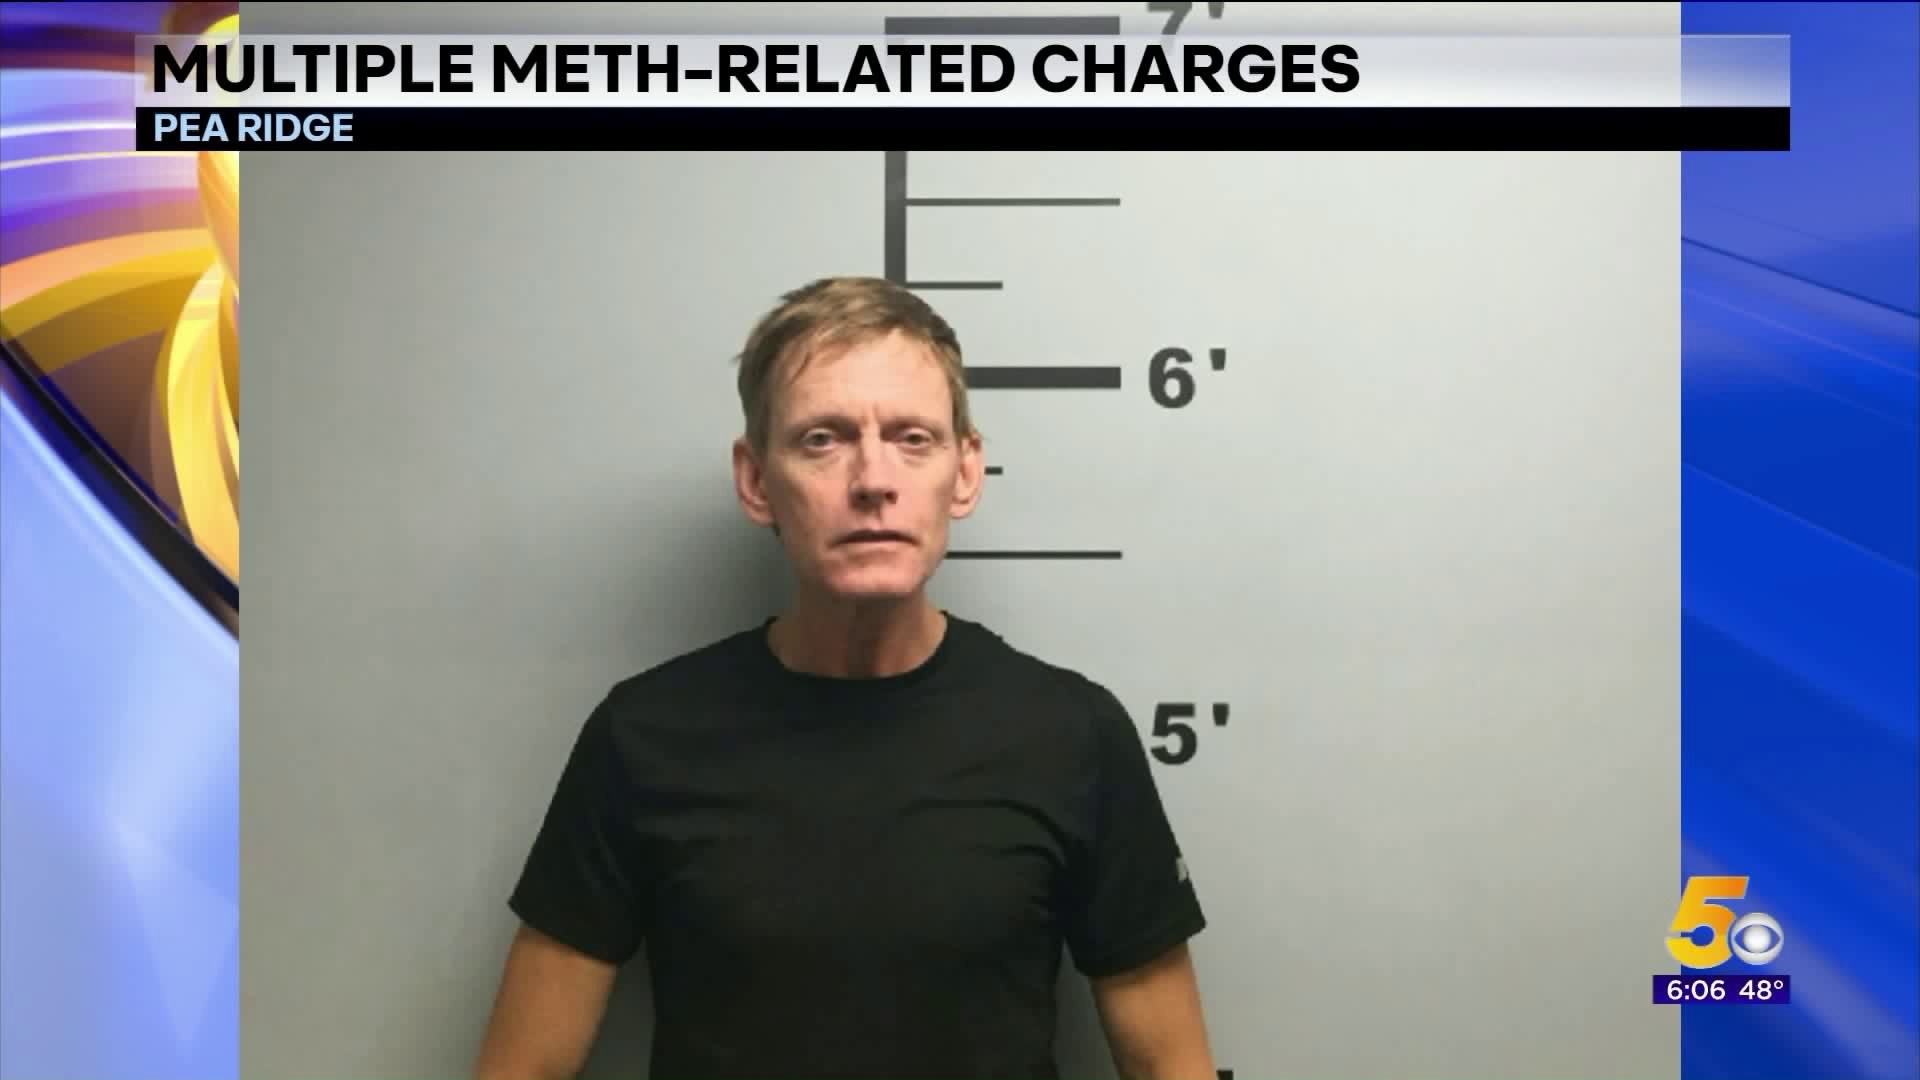 Pea Ridge Man Arrested, Charged With Possession of Meth After Shouting At Police